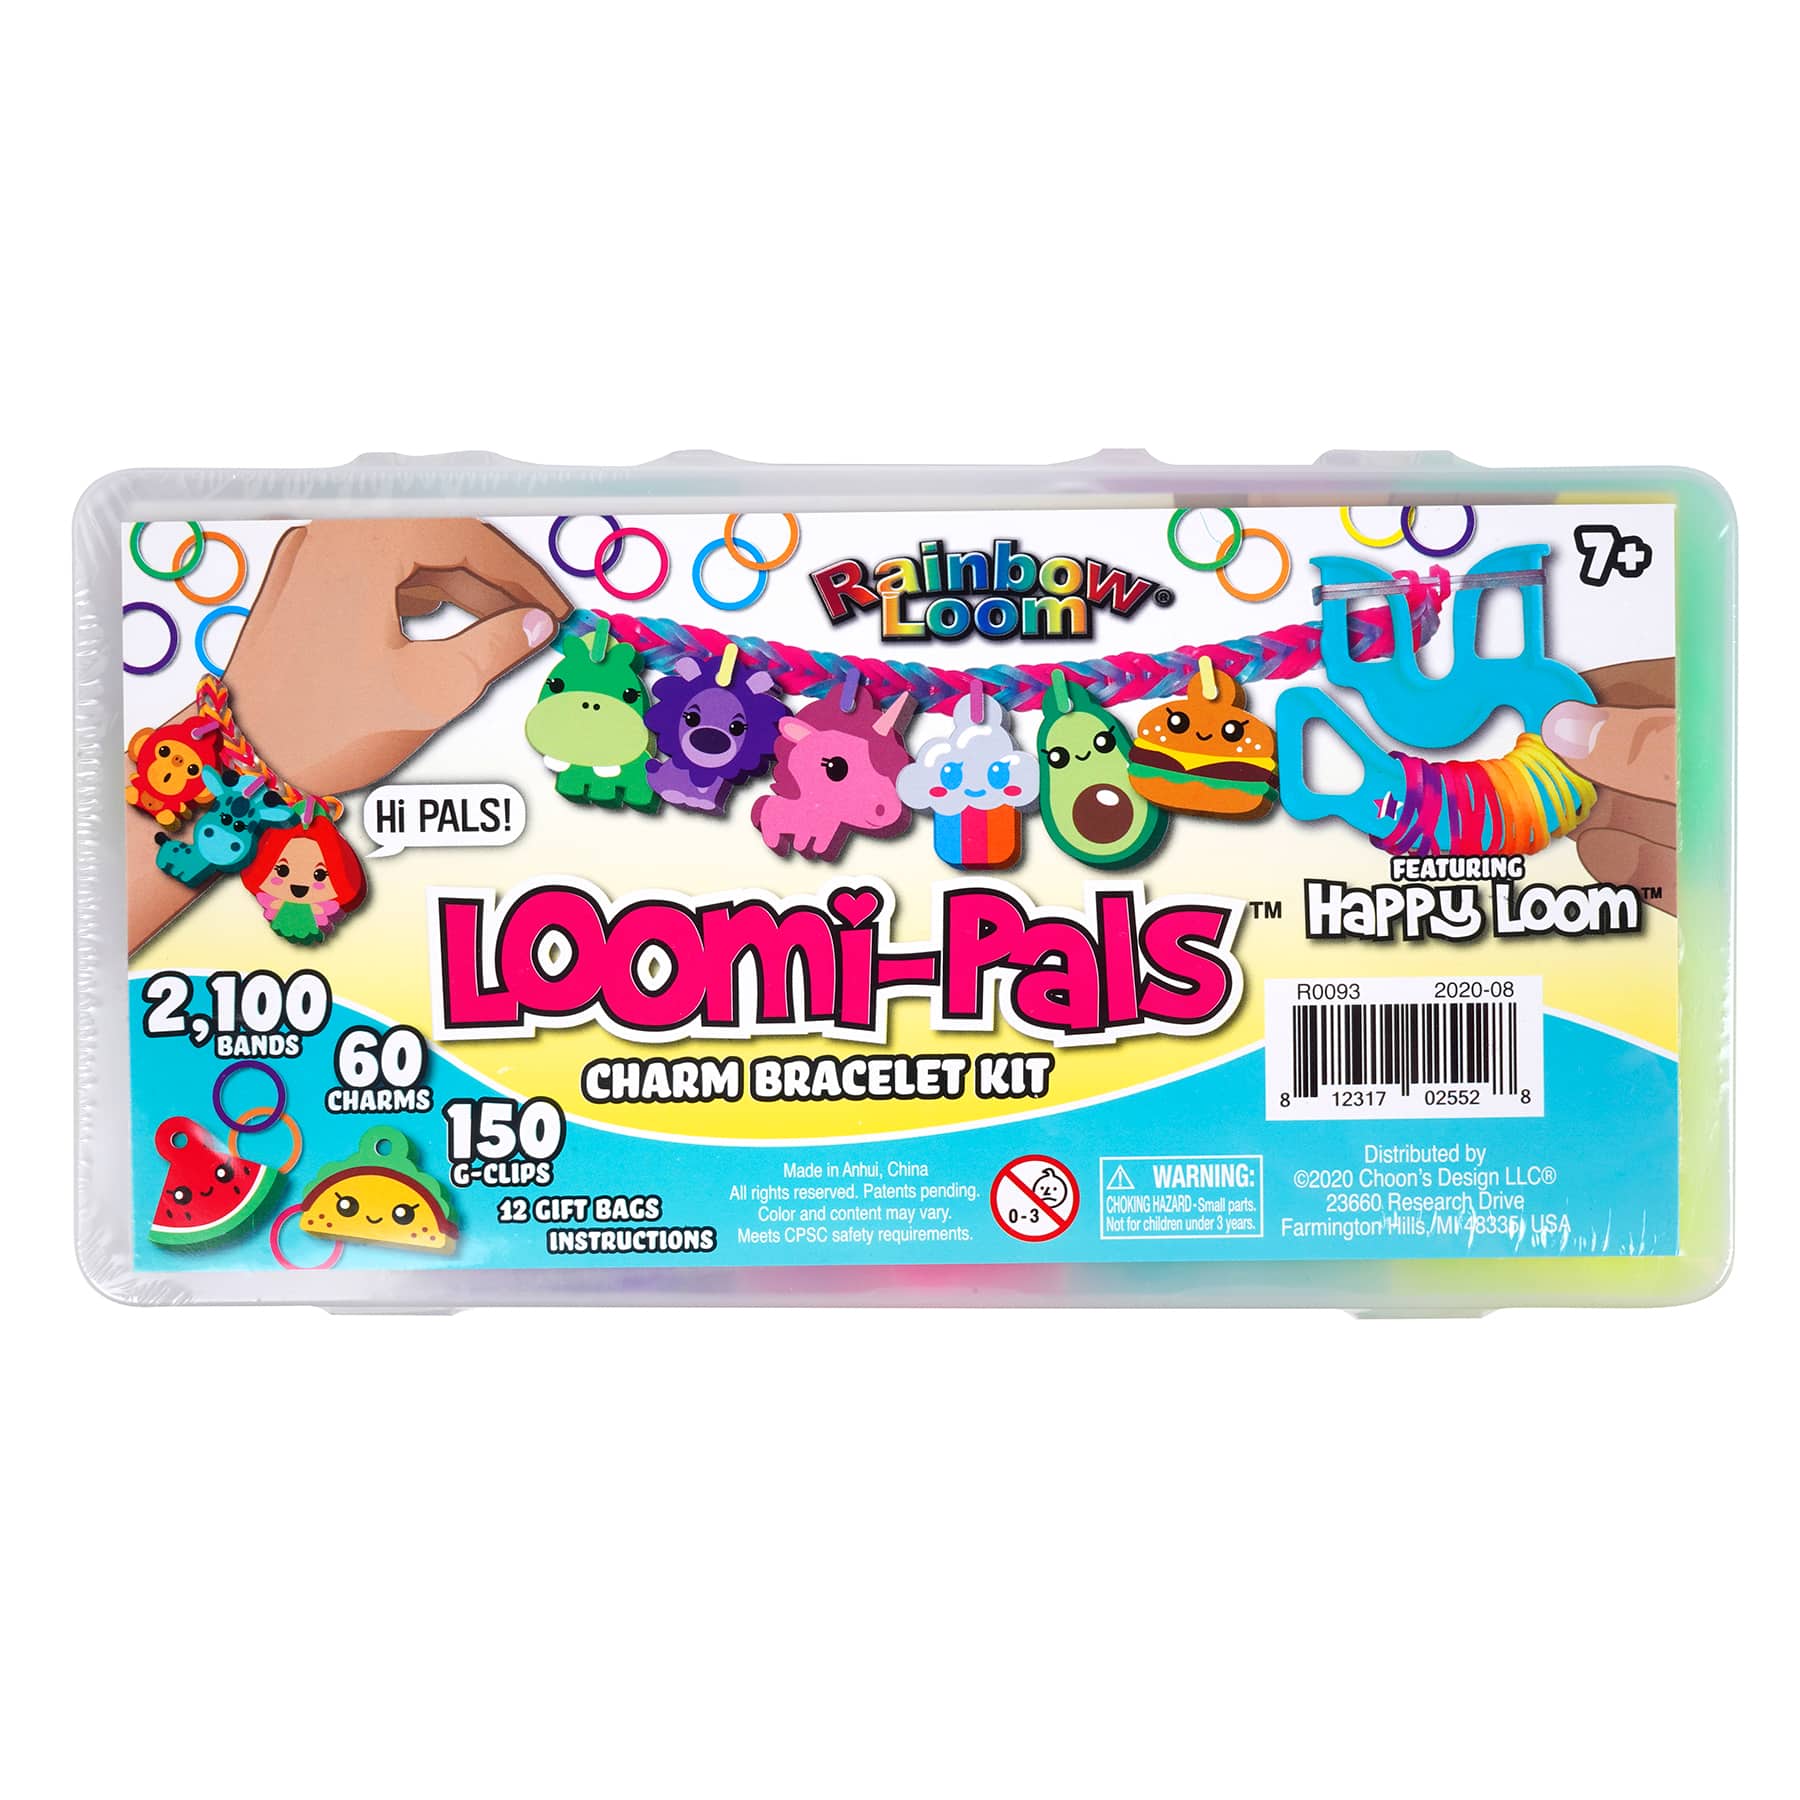 Loomi-Pals Charm Bracelet Kit: Party Collectible - Wit & Whimsy Toys